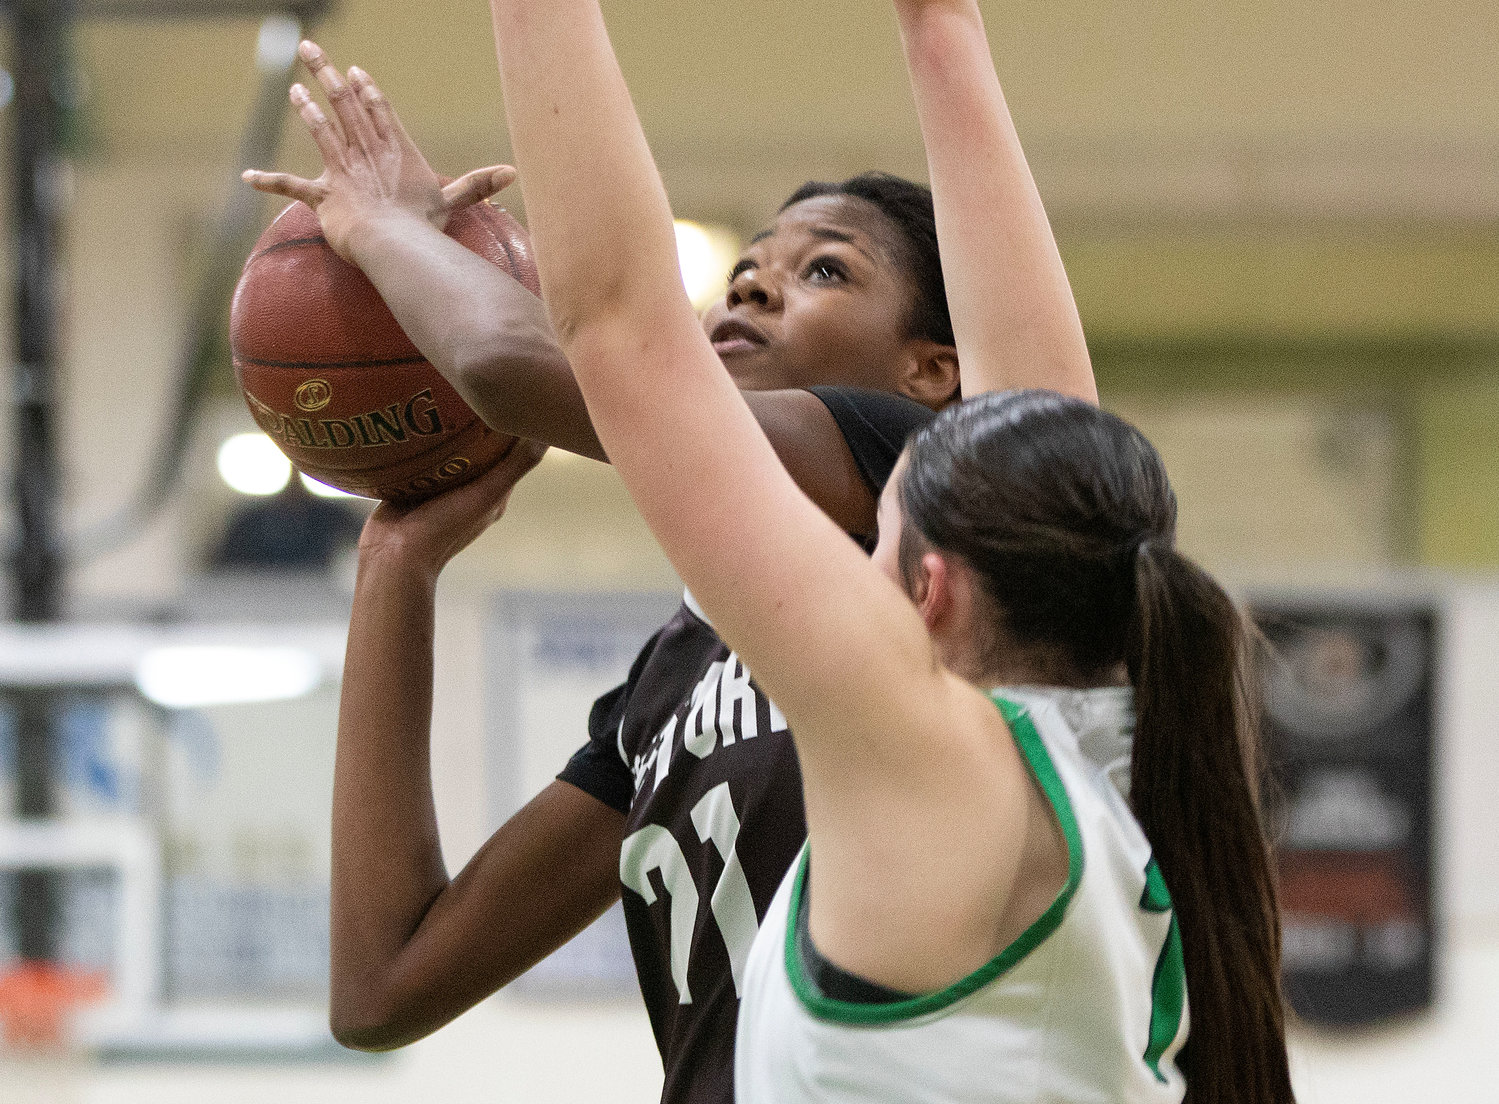 Jenna Egbe puts back a rebound in the second half. The sophomore center finished with 5 points.